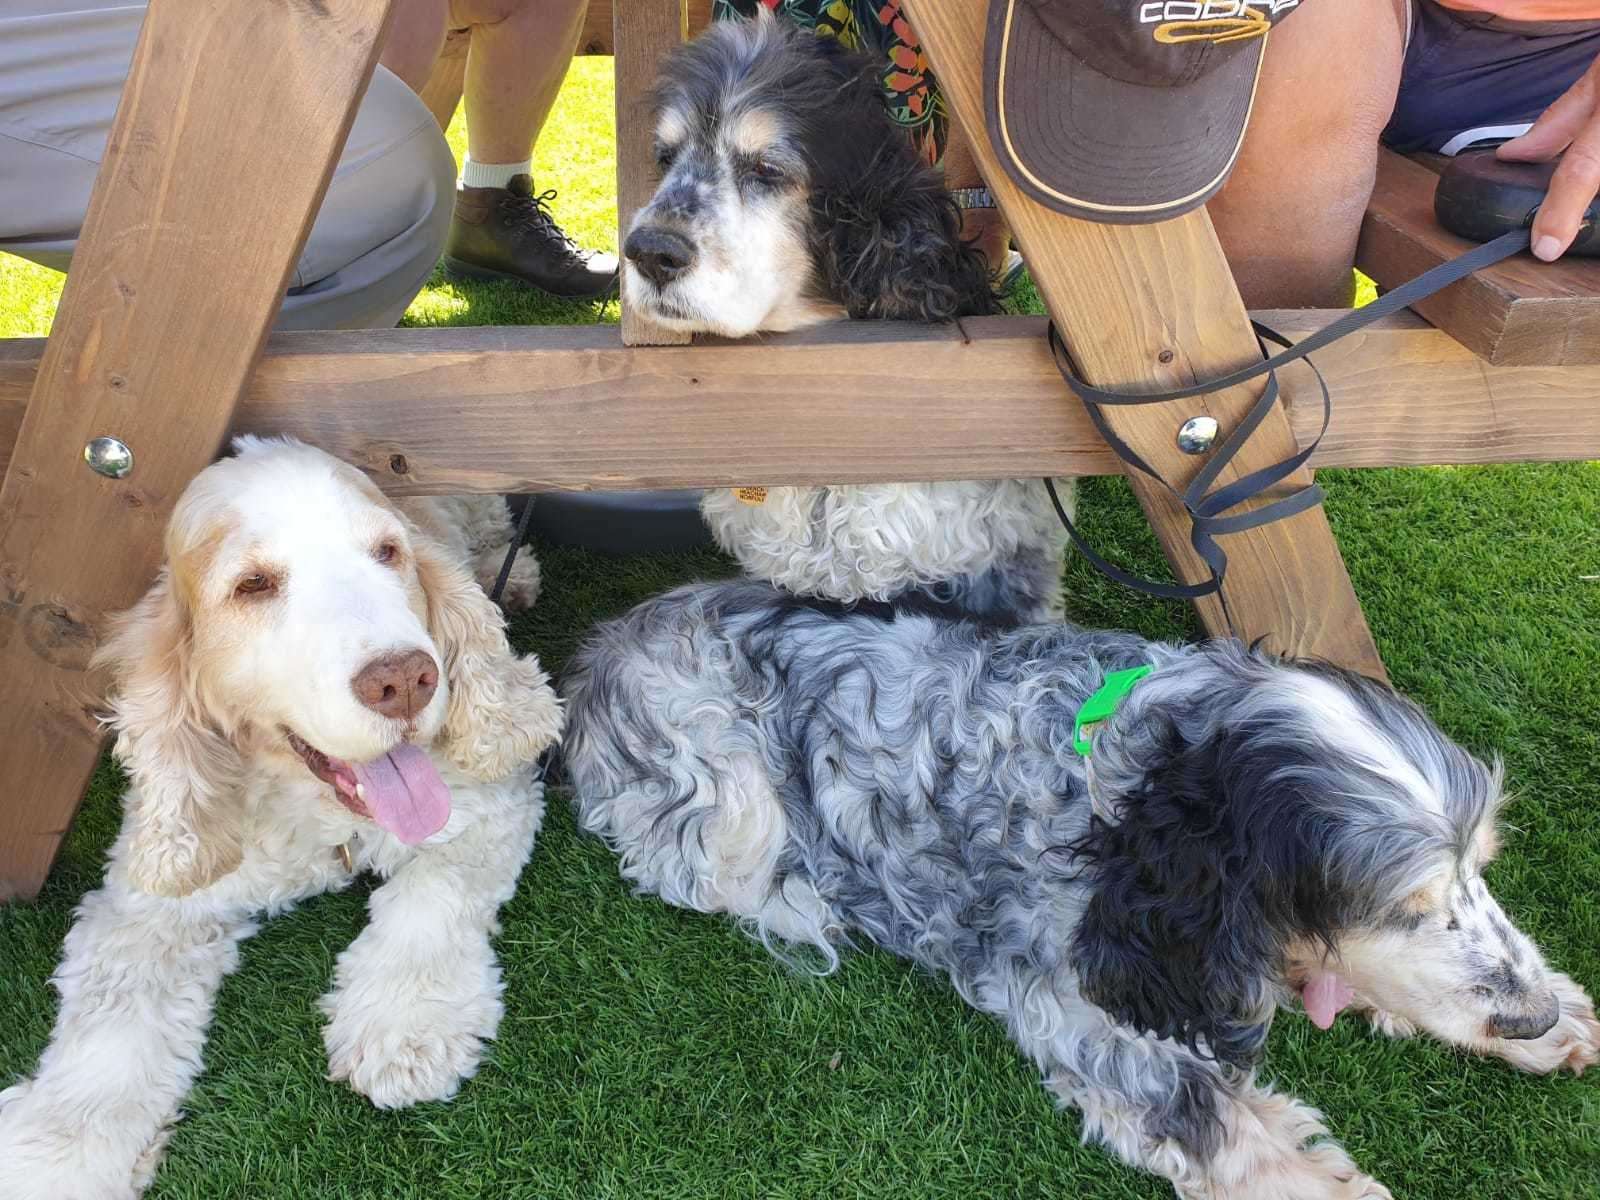 The Warehouse Taproom Bar and Restaurant also welcomes dogs